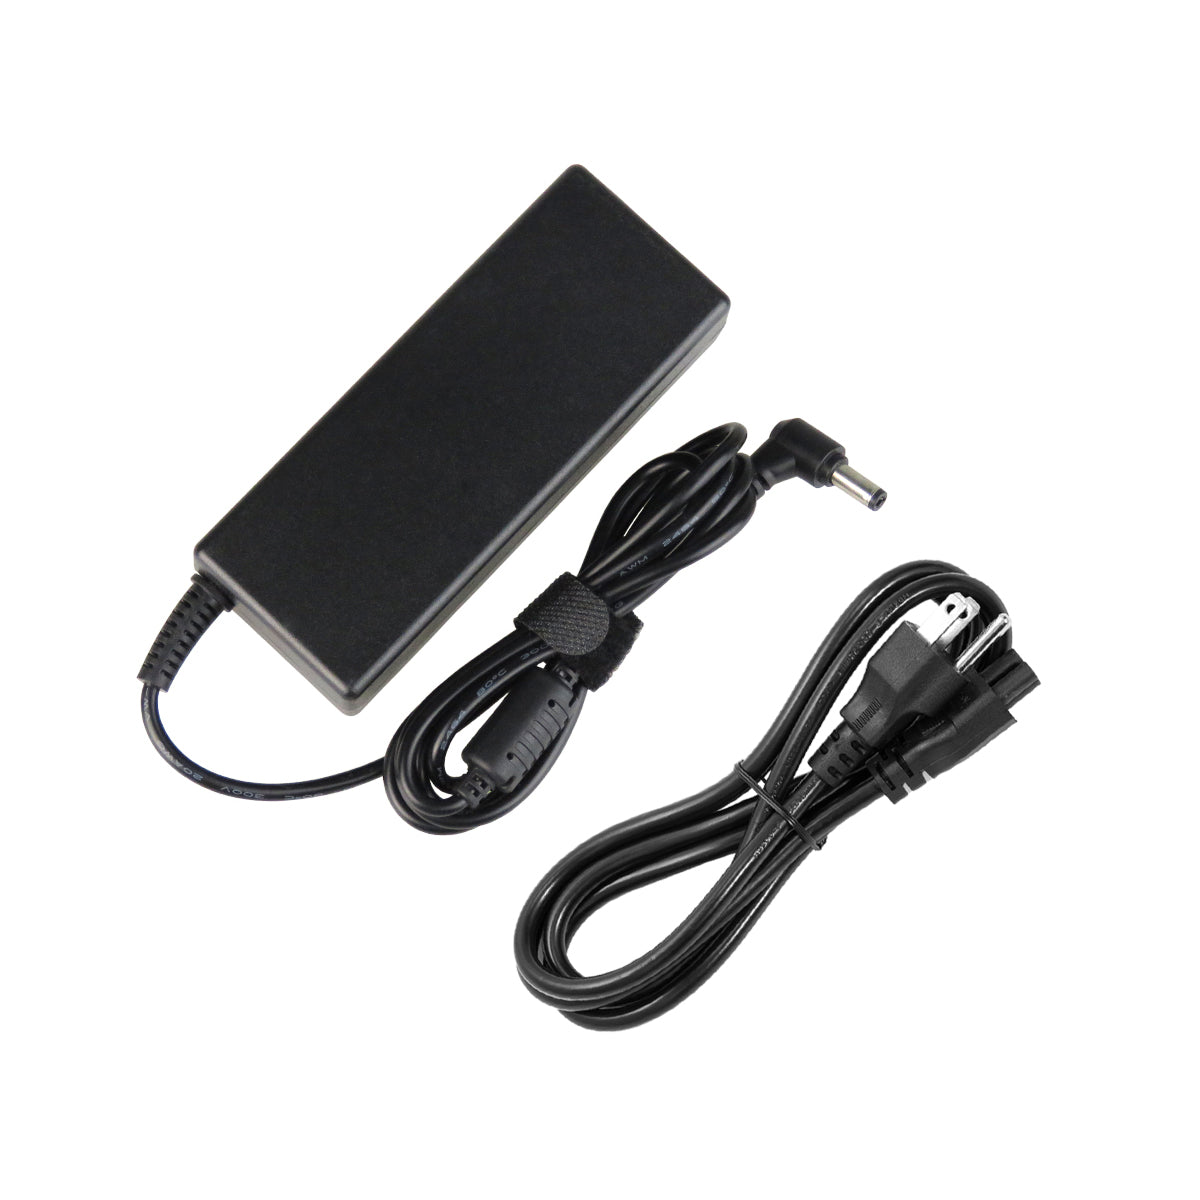 AC Adapter Charger for ASUS U53SD Notebook.